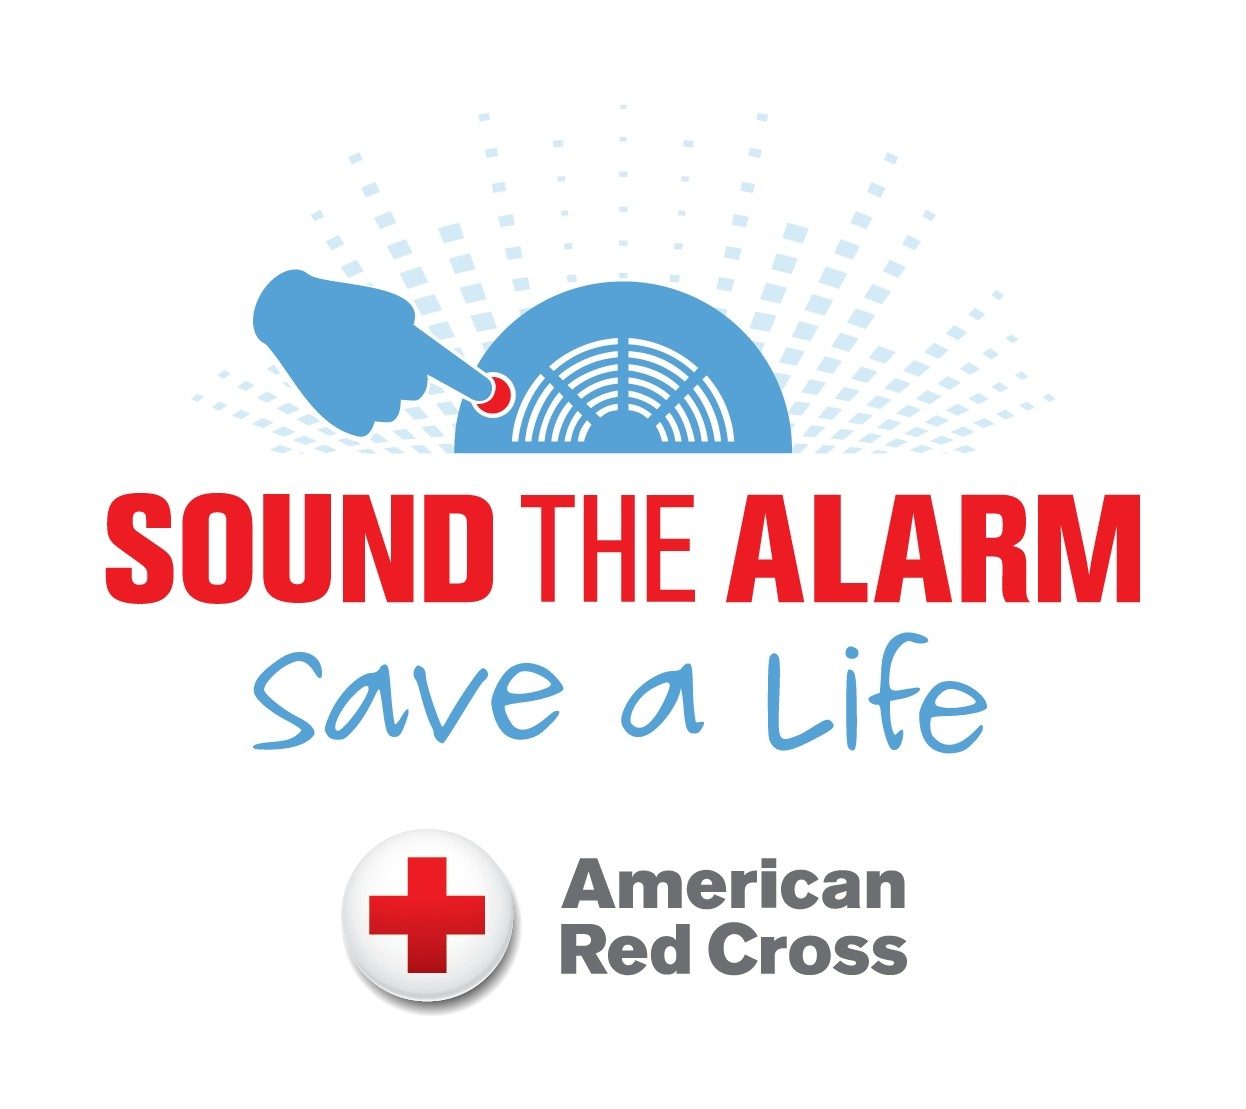 Sound the Alarm Save a Life with drawing of blue hand and smoke alarm banner